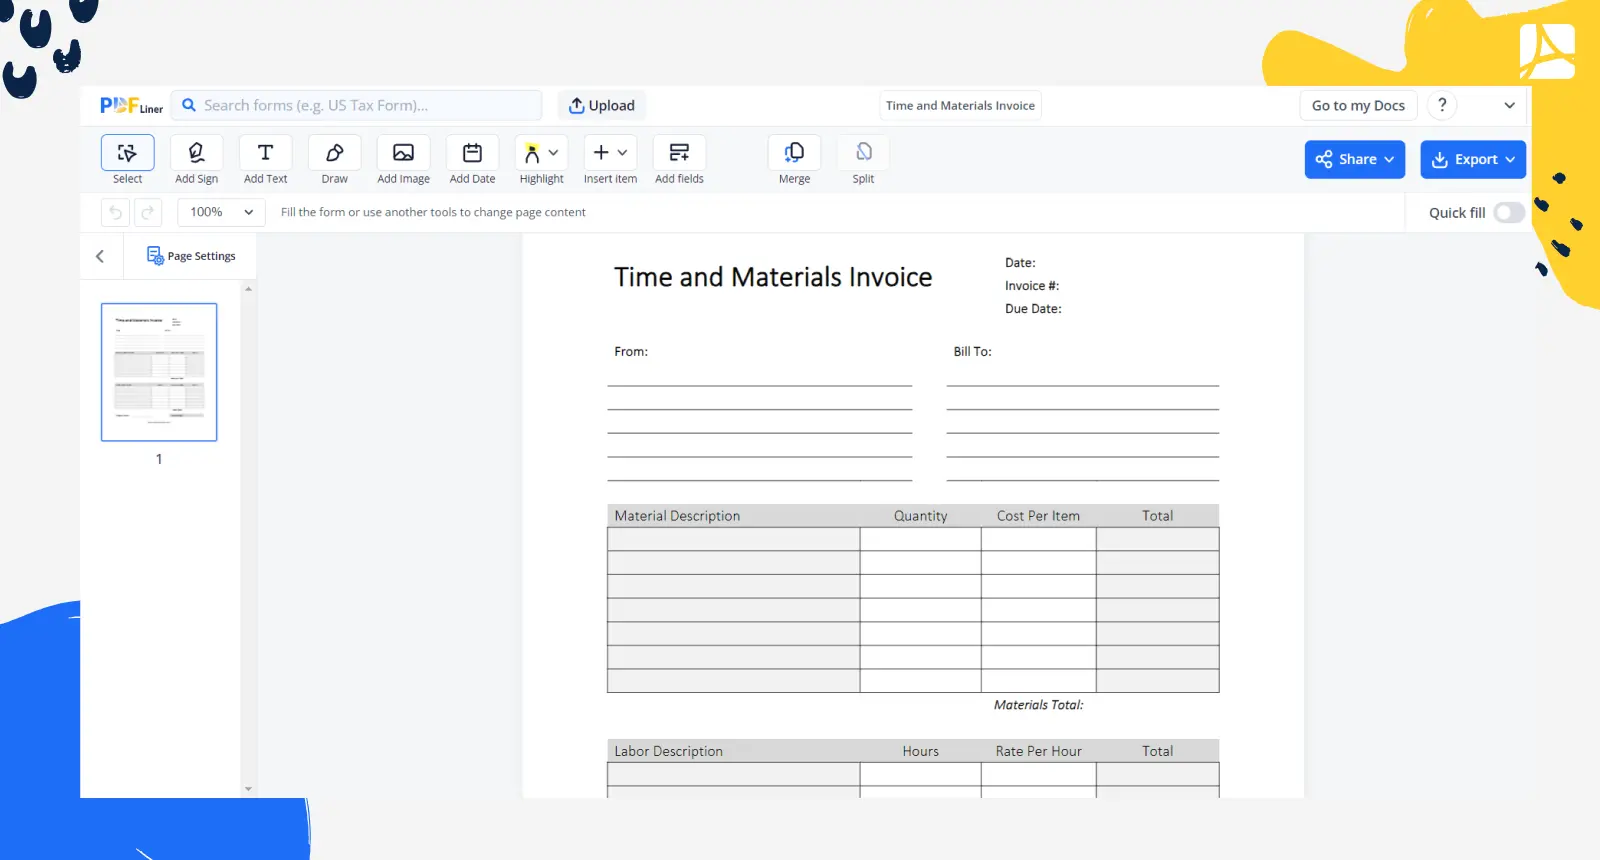 Time and Materials Invoice Screenshot